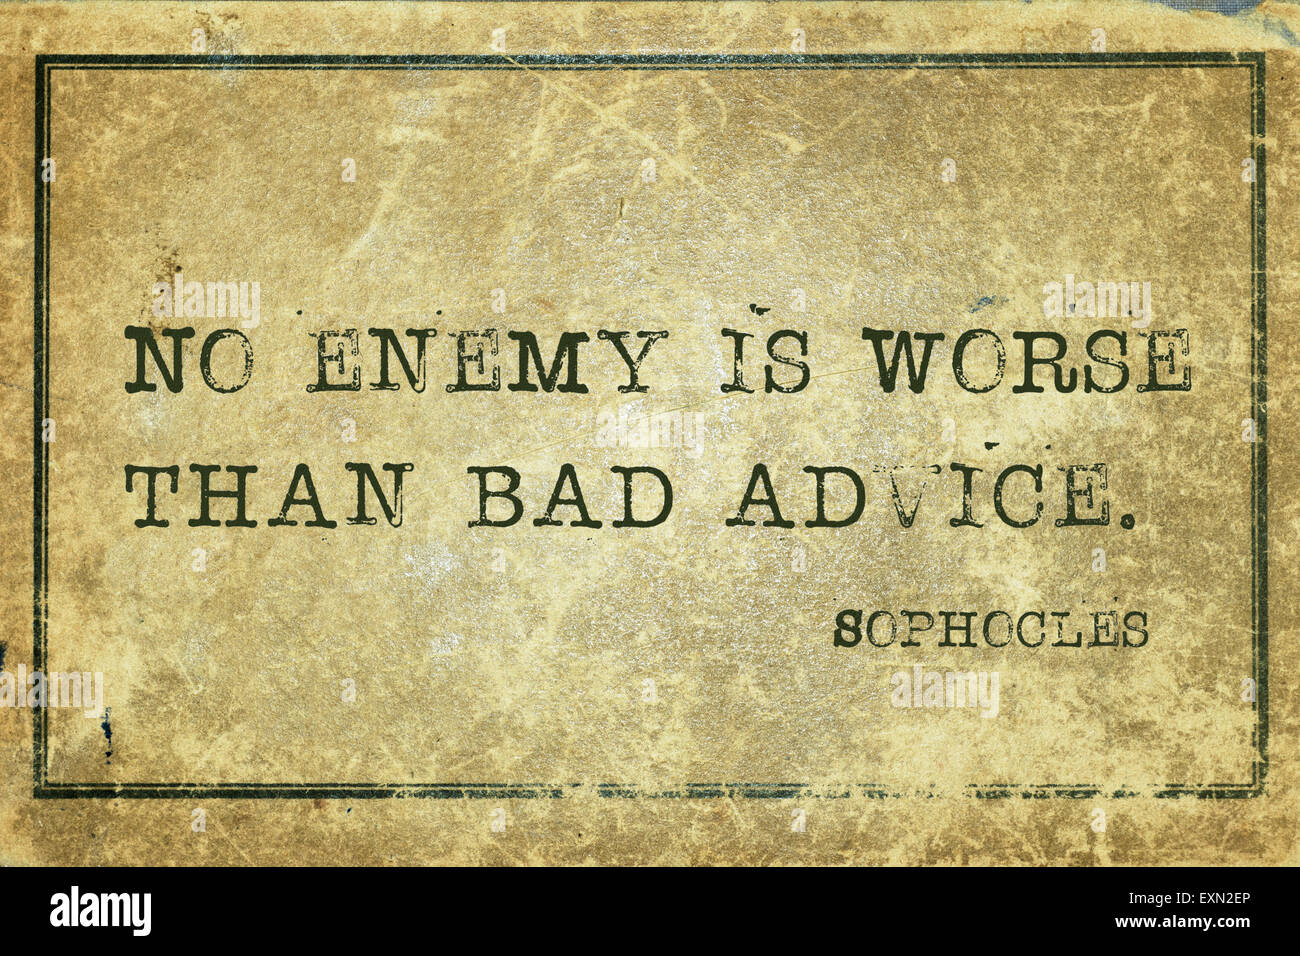 No enemy is worse than bad advice - ancient Greek philosopher Sophocles quote printed on grunge vintage cardboard Stock Photo